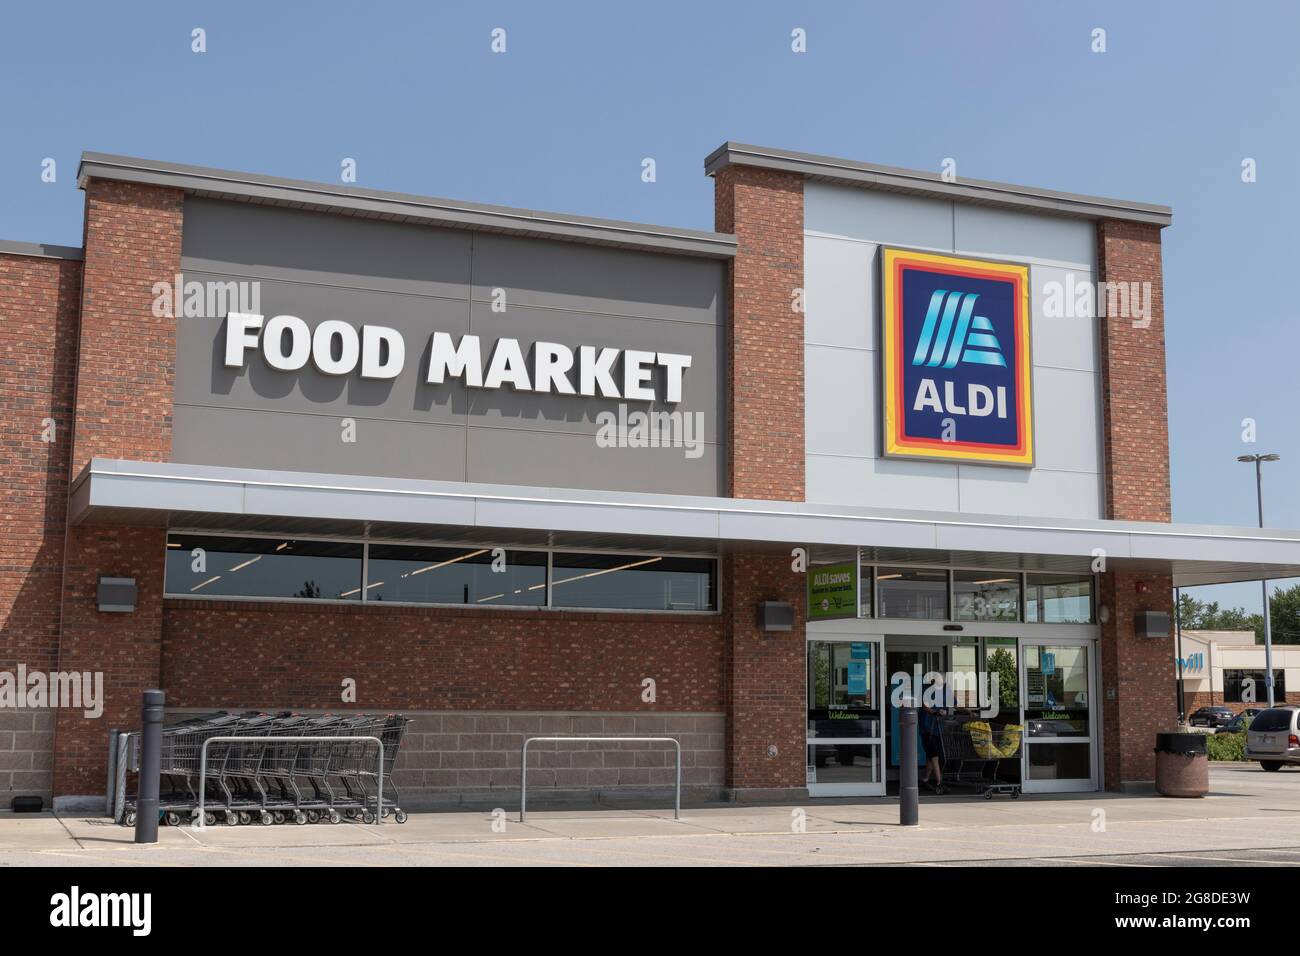 Plainfield - Circa July 2021: Aldi Discount Supermarket. Aldi sells a range of grocery items, including produce, meat and dairy at discount prices. Stock Photo